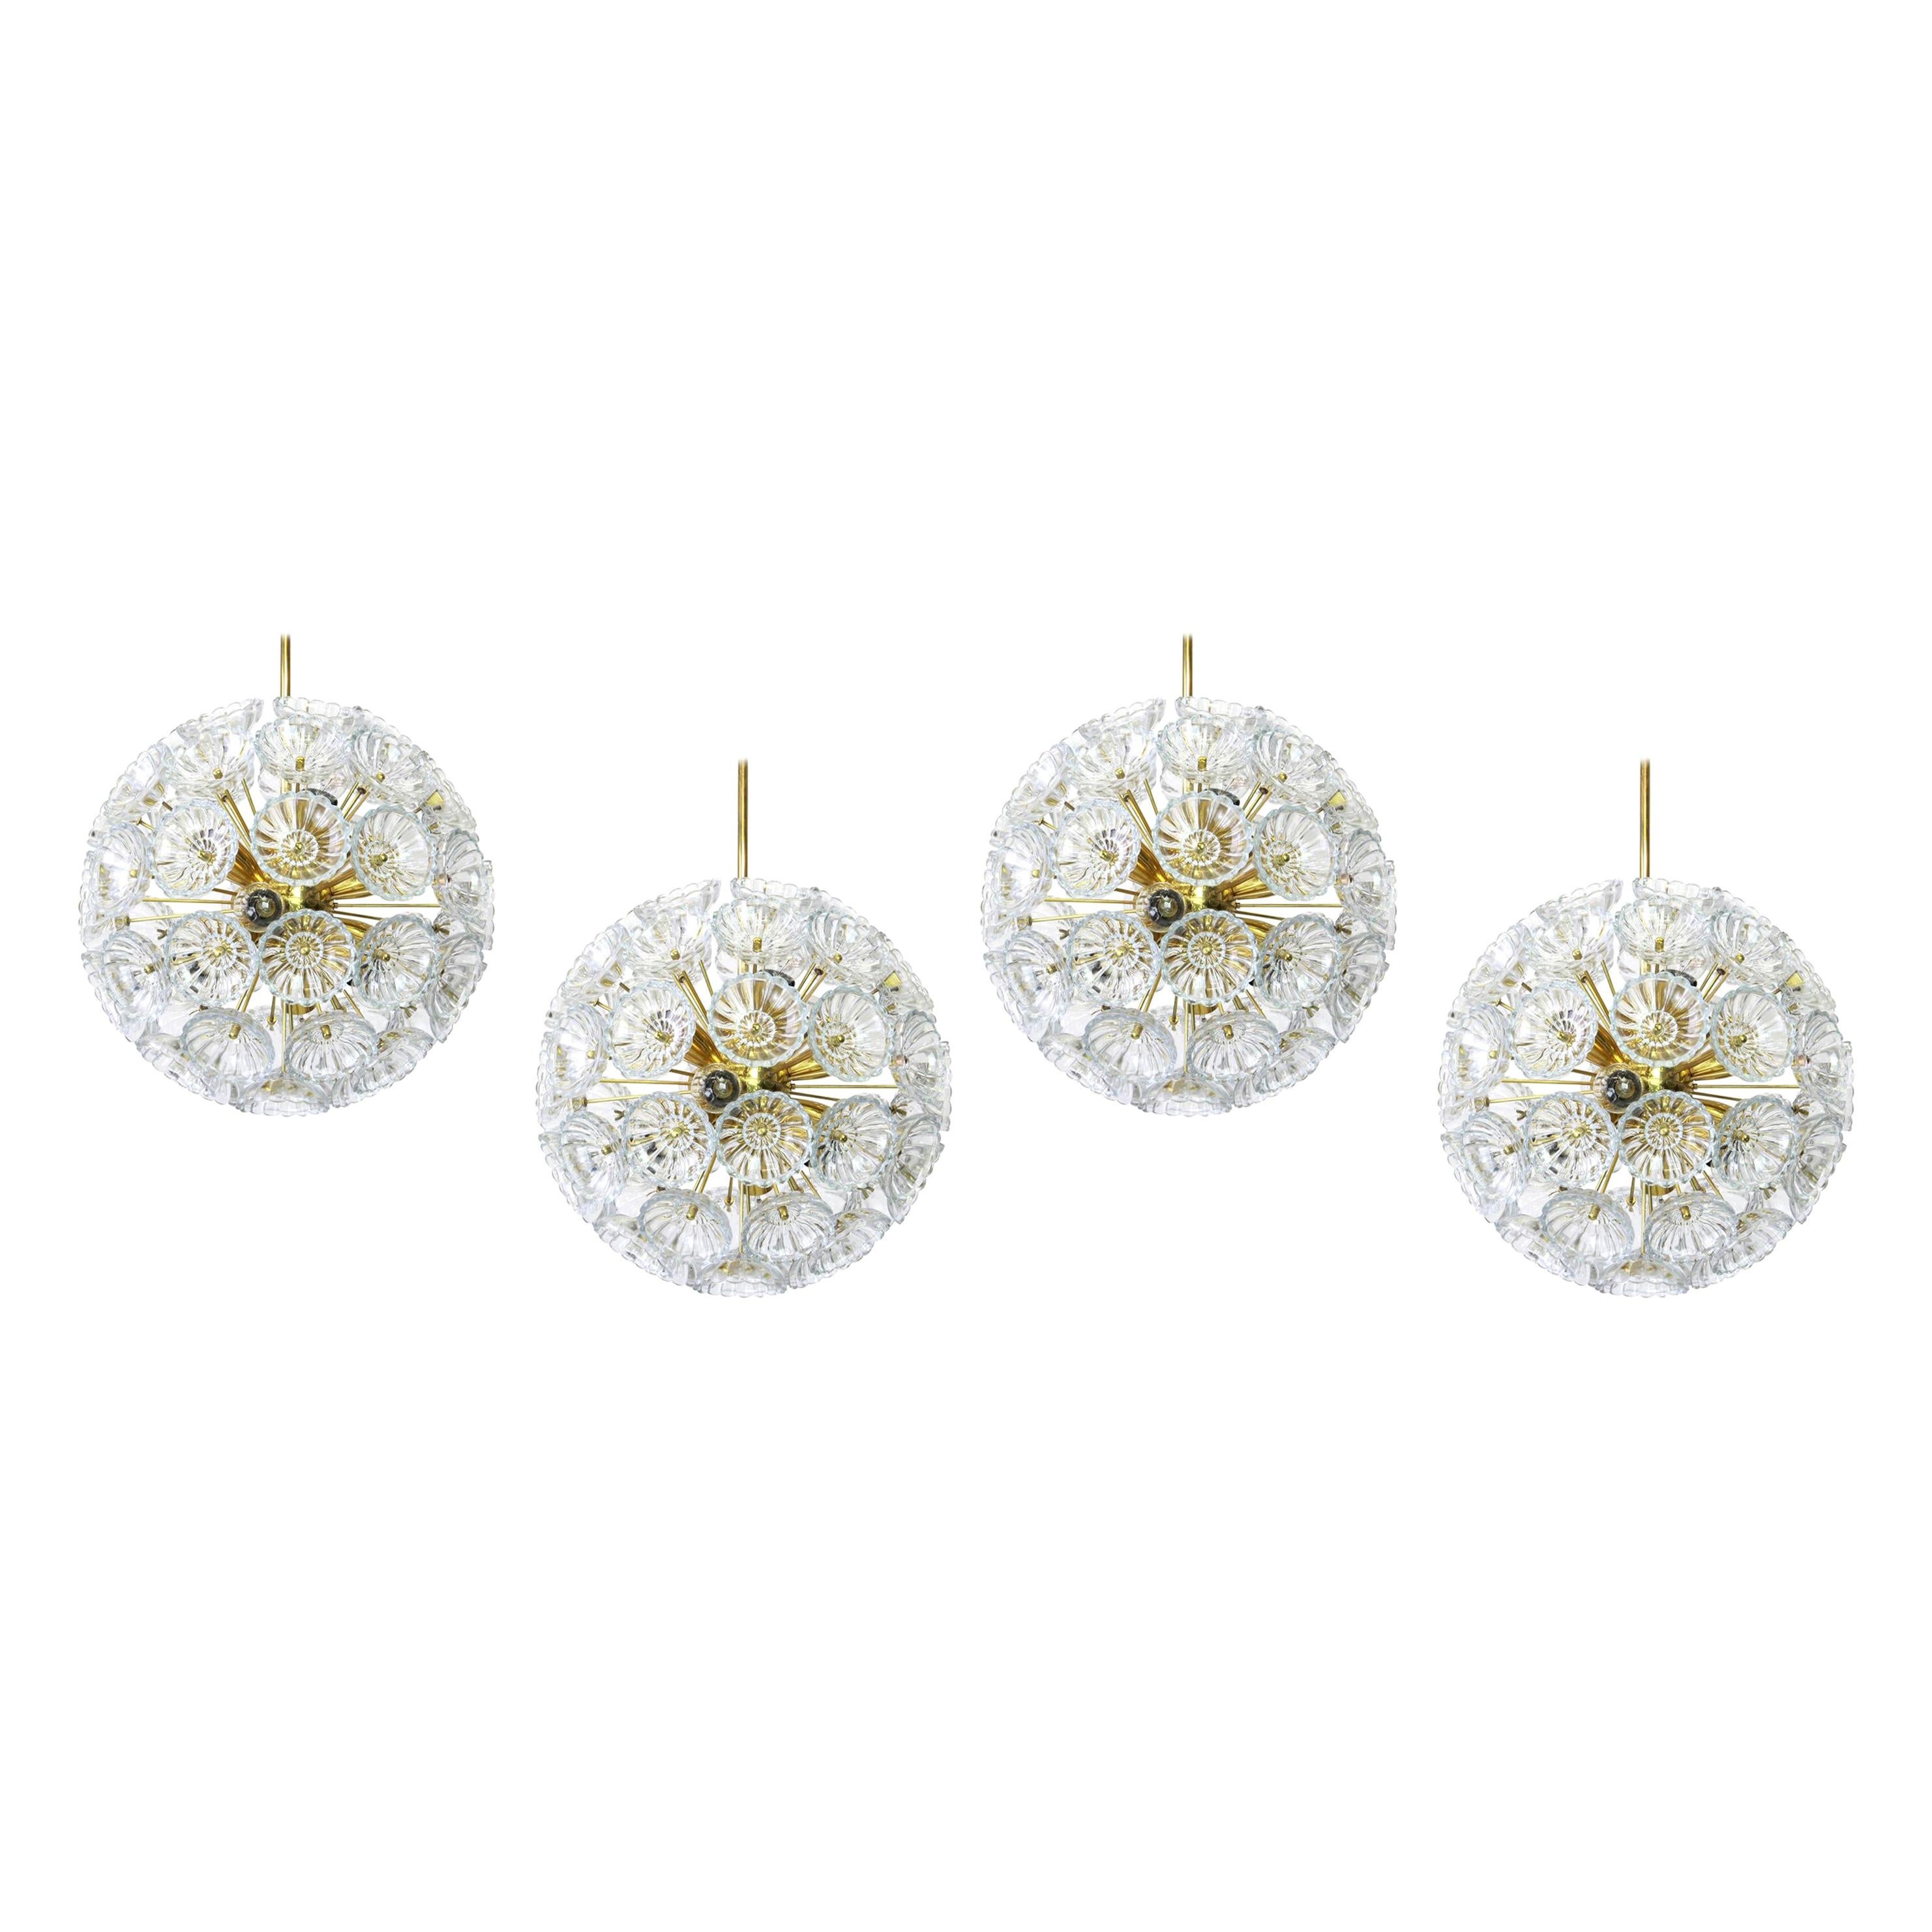 1 of 24 Stunning Floral Glass and Brass Sputnik Chandeliers, Germany, 1960s